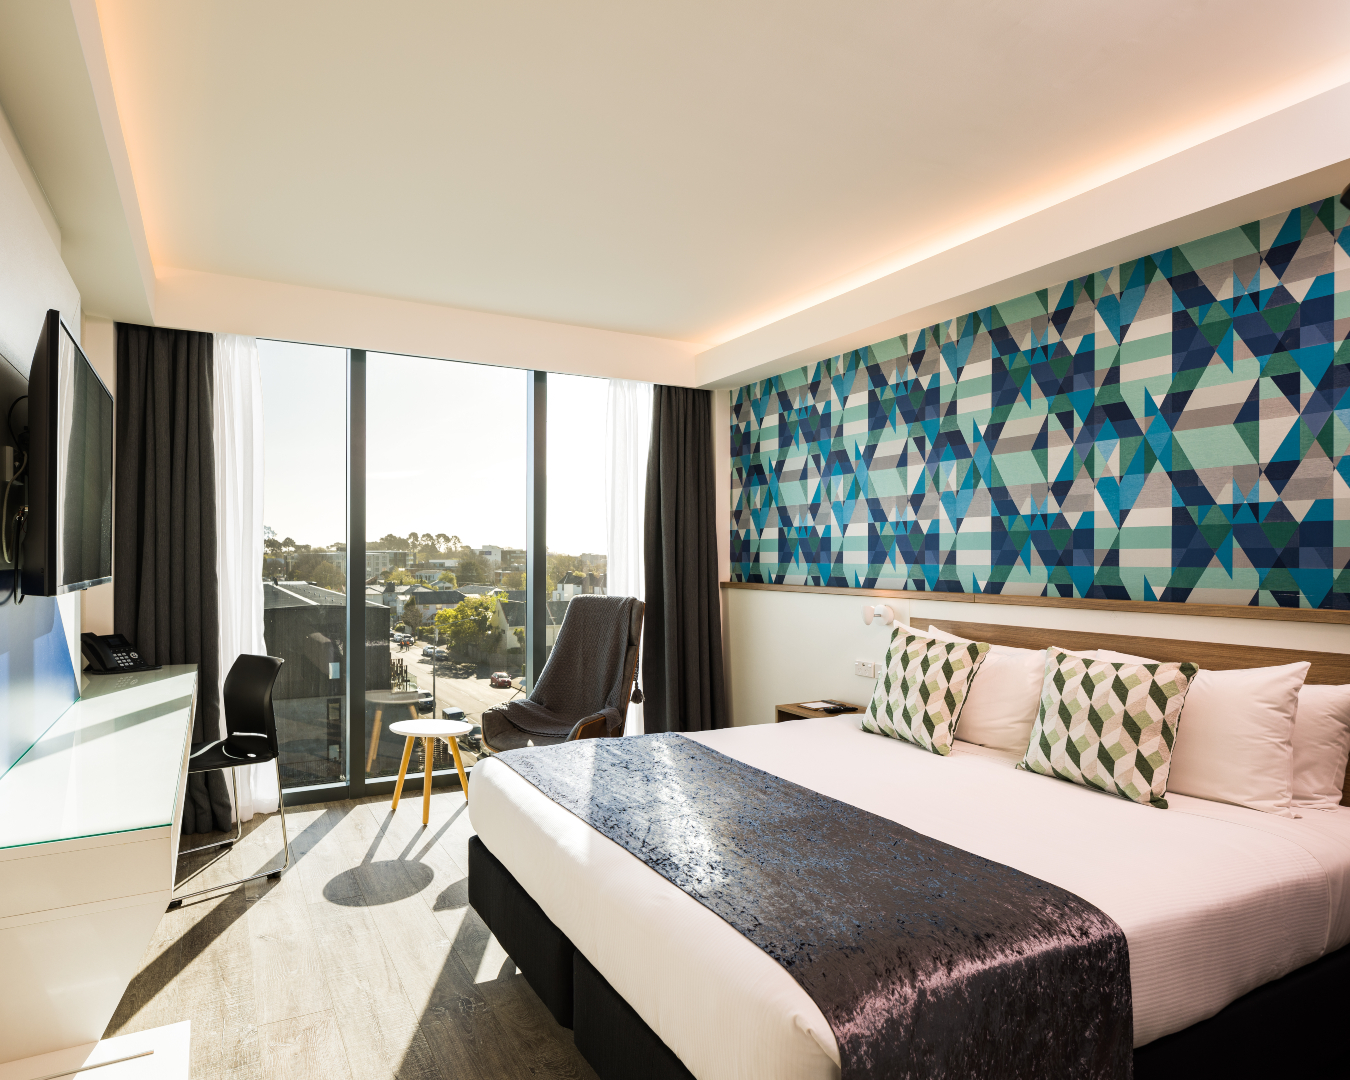 Drenched in sun, a room at the Carnmore Hotel features colourful art, a plush bed, and city views 